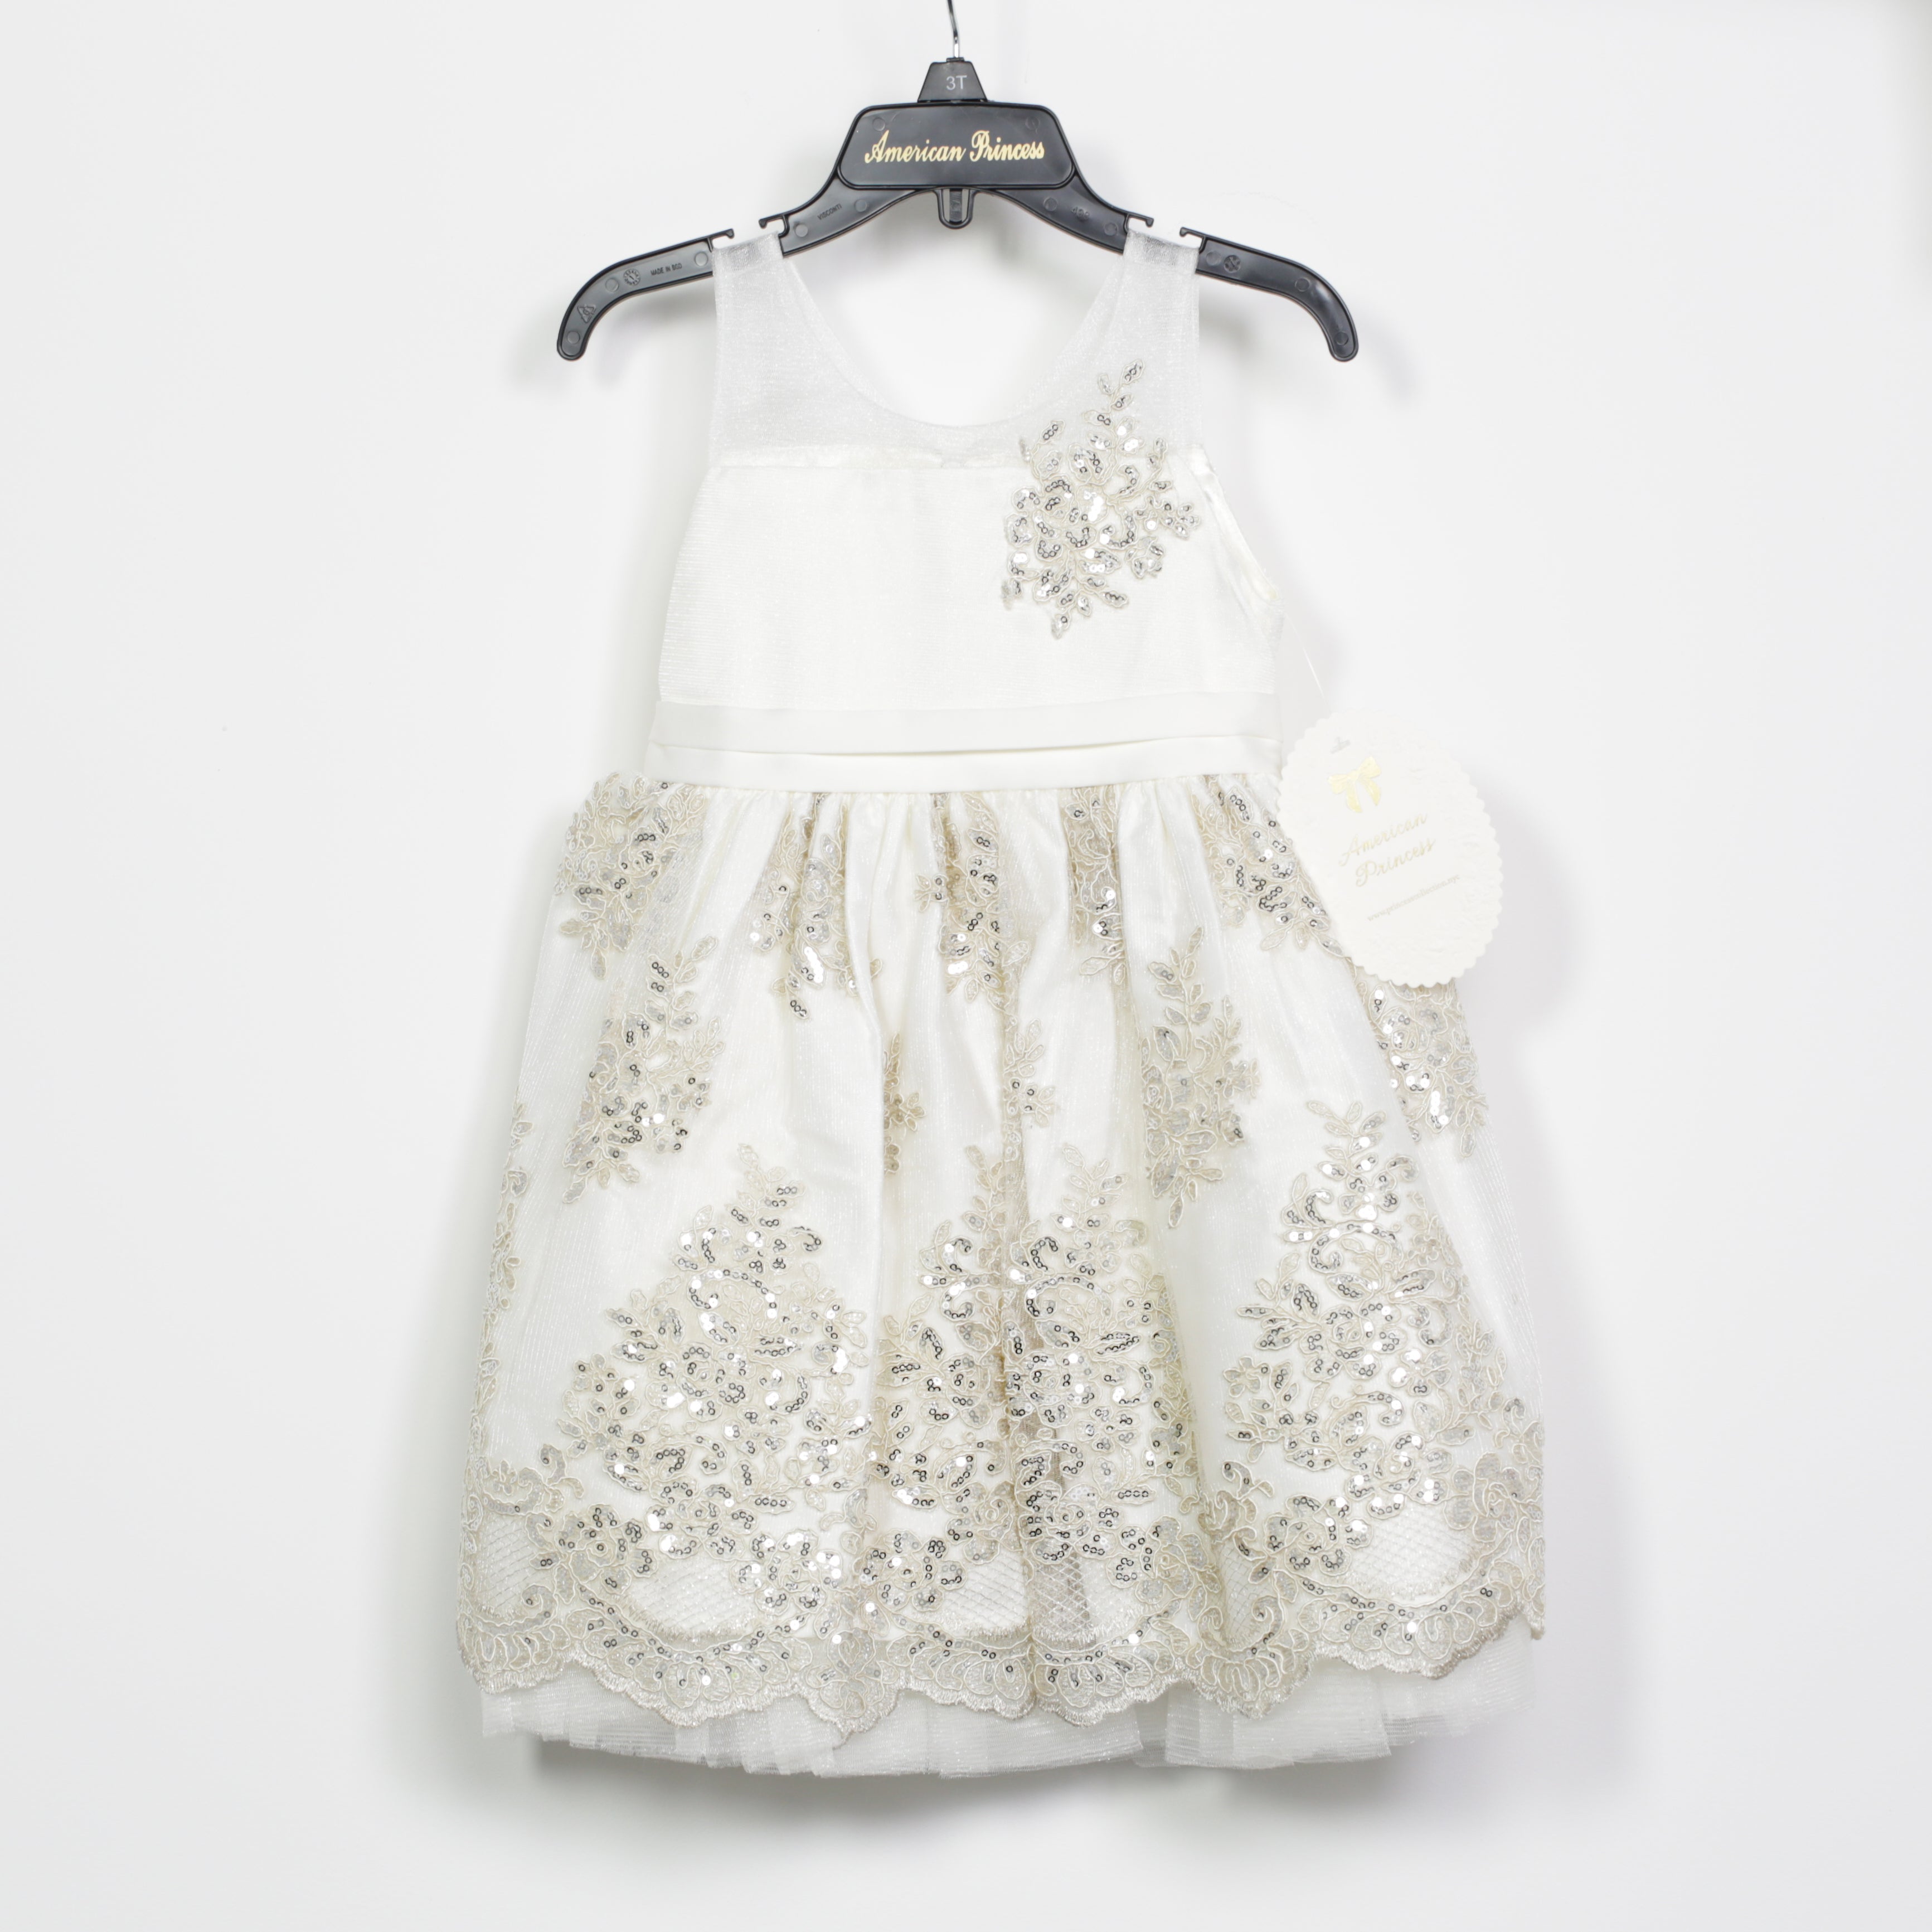 American Princess Ivory Dress - Embroidered Flowers